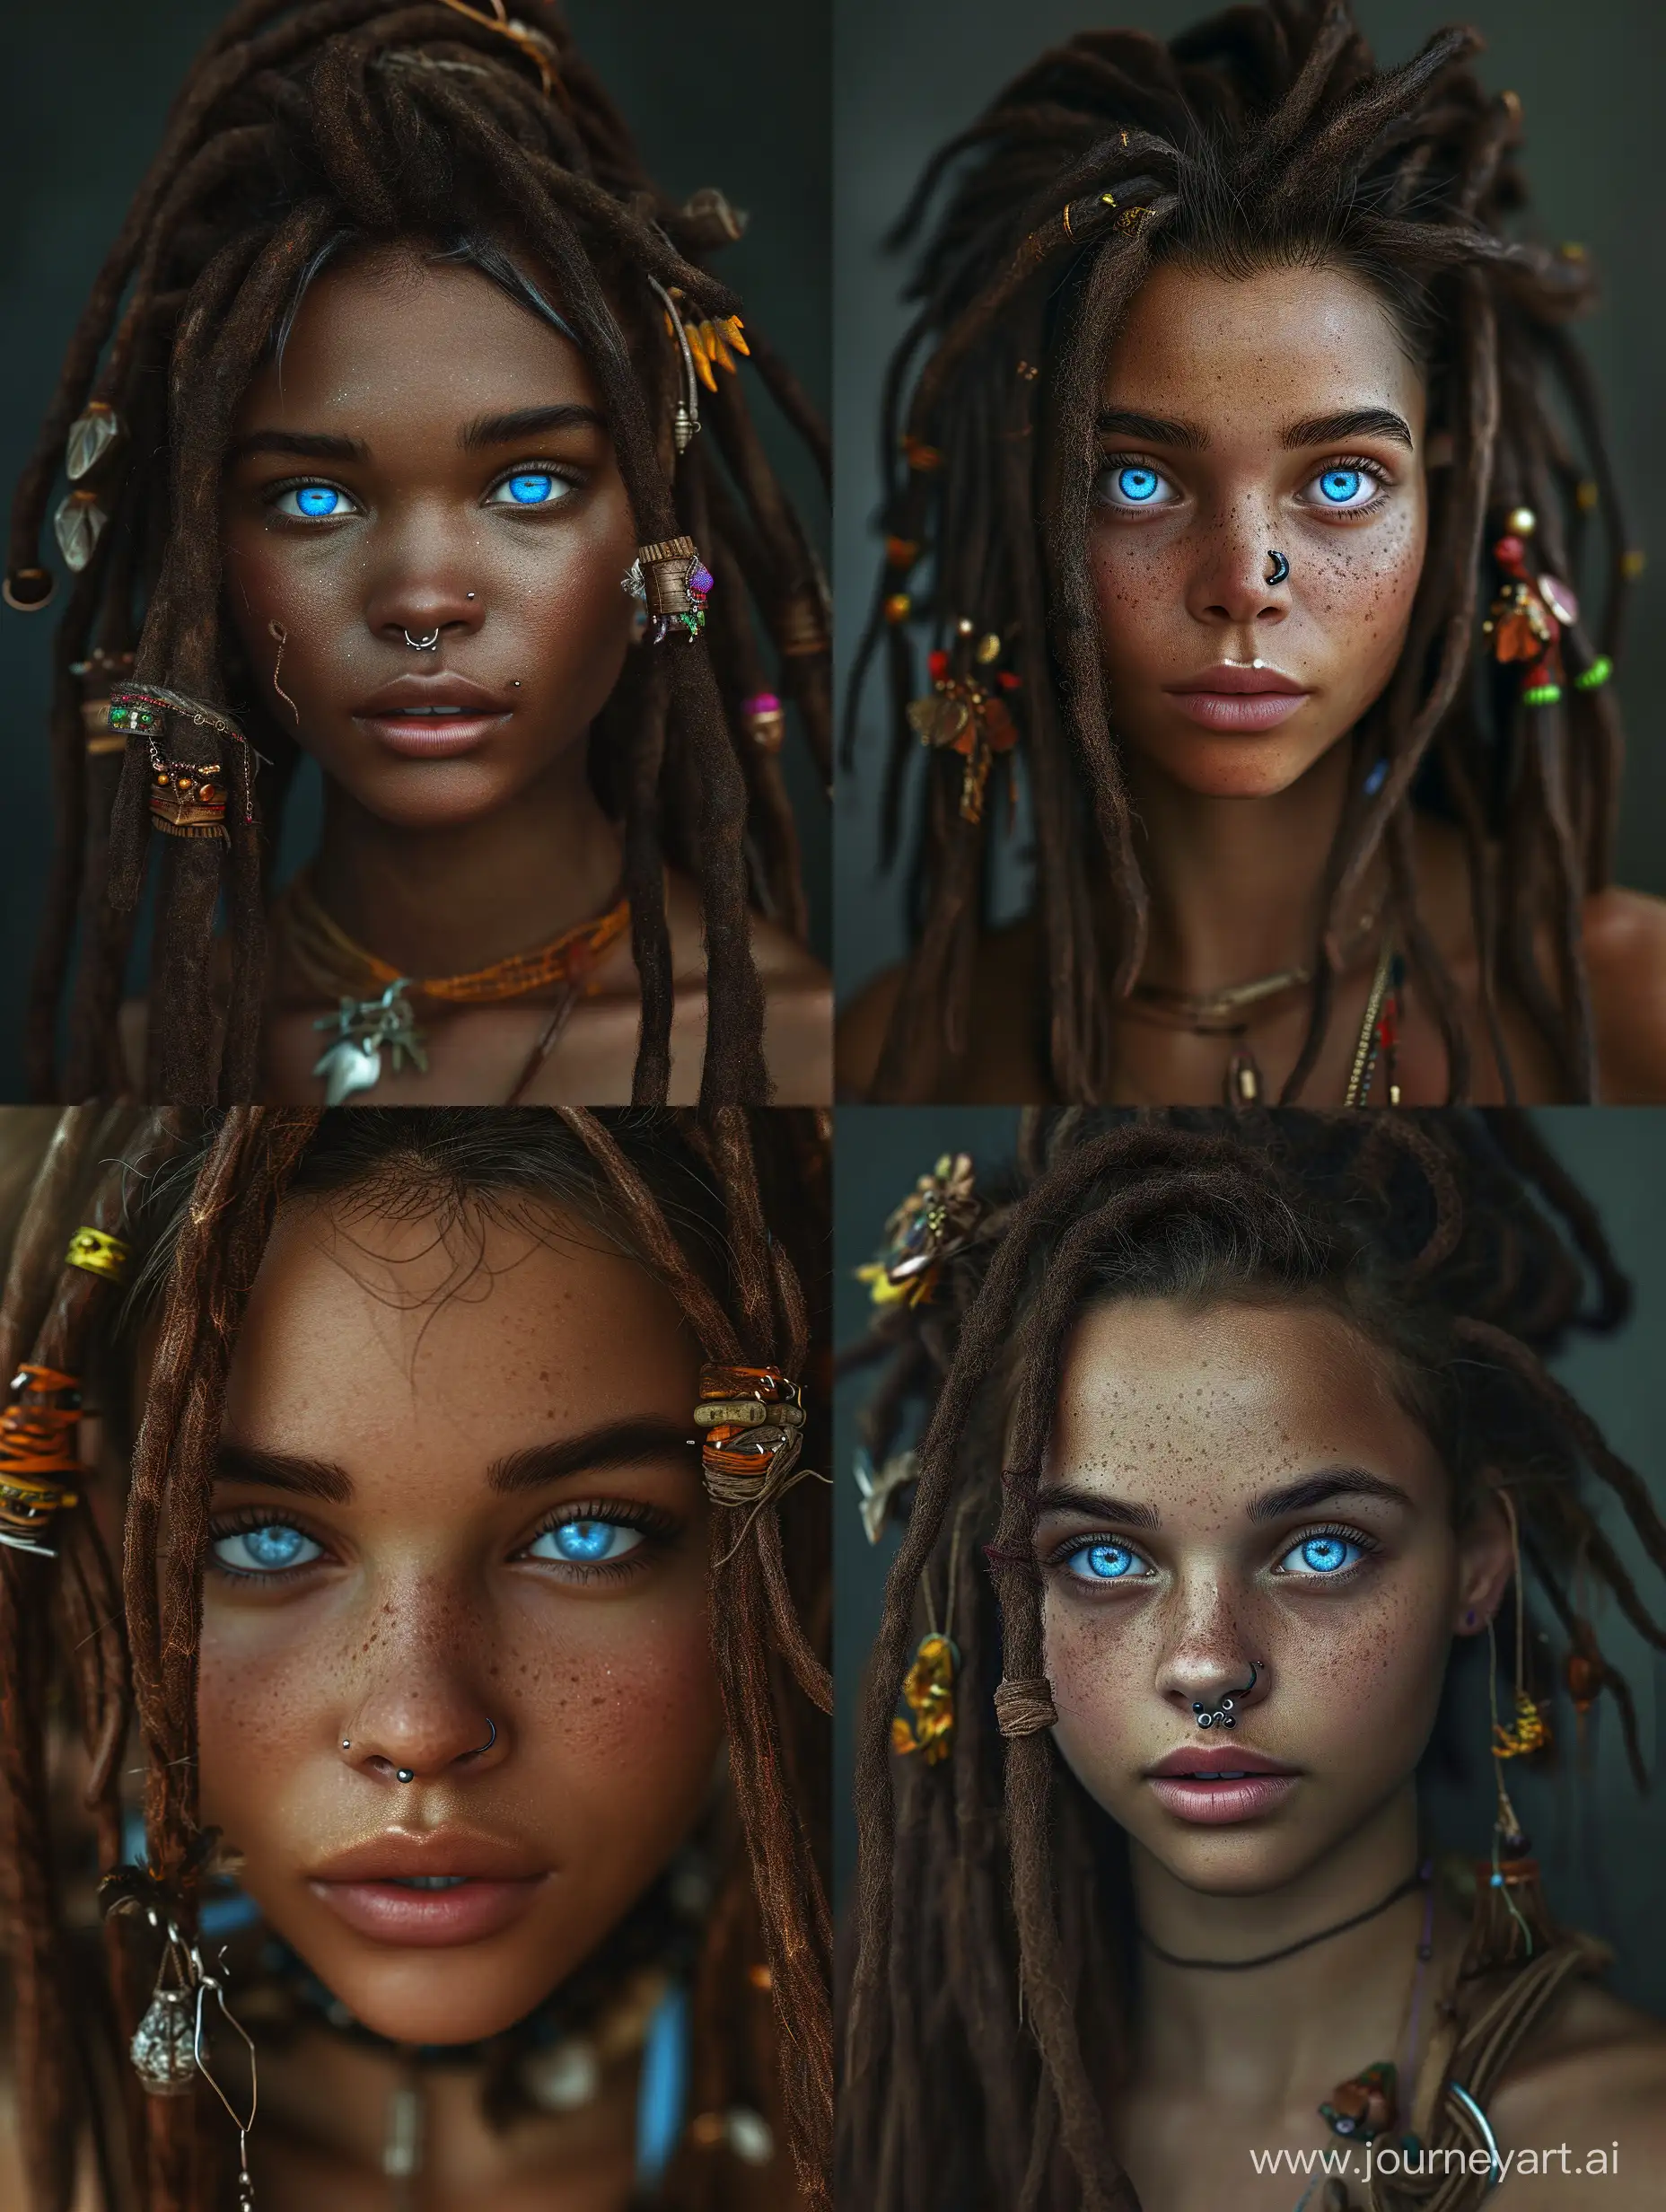 Soulful-Portrait-of-a-Young-Woman-with-Dreadlocks-and-Vibrant-Blue-Eyes